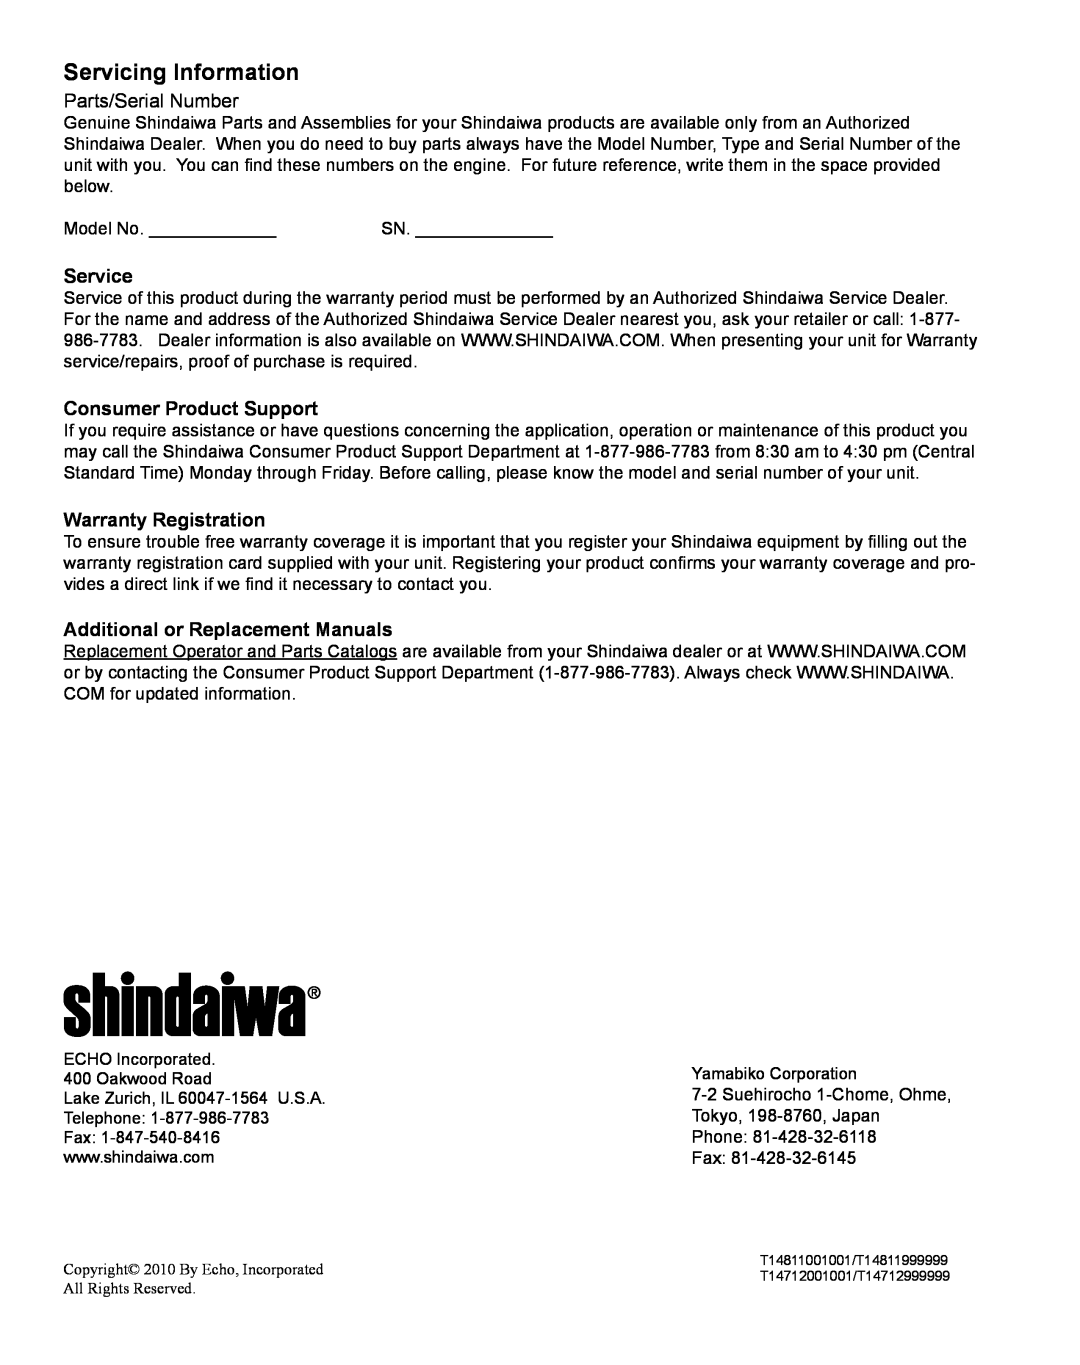 Shindaiwa X7502831200 Servicing Information, Service, Consumer Product Support, Warranty Registration, Parts/Serial Number 